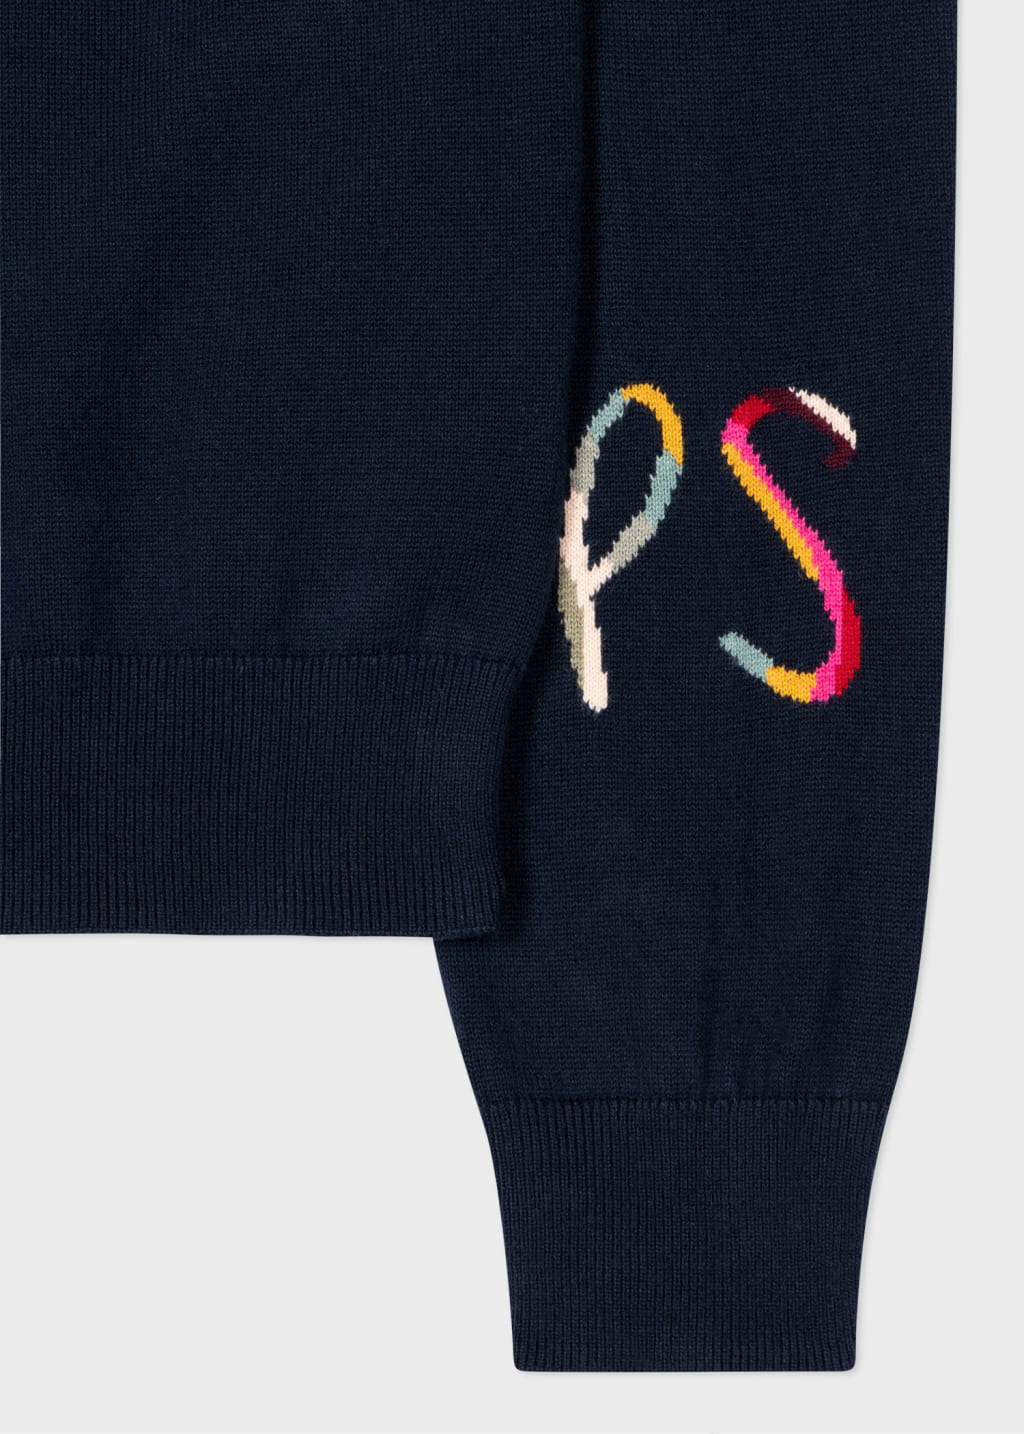 Detail View - Women's Navy Knitted Initials Sweater Paul Smith